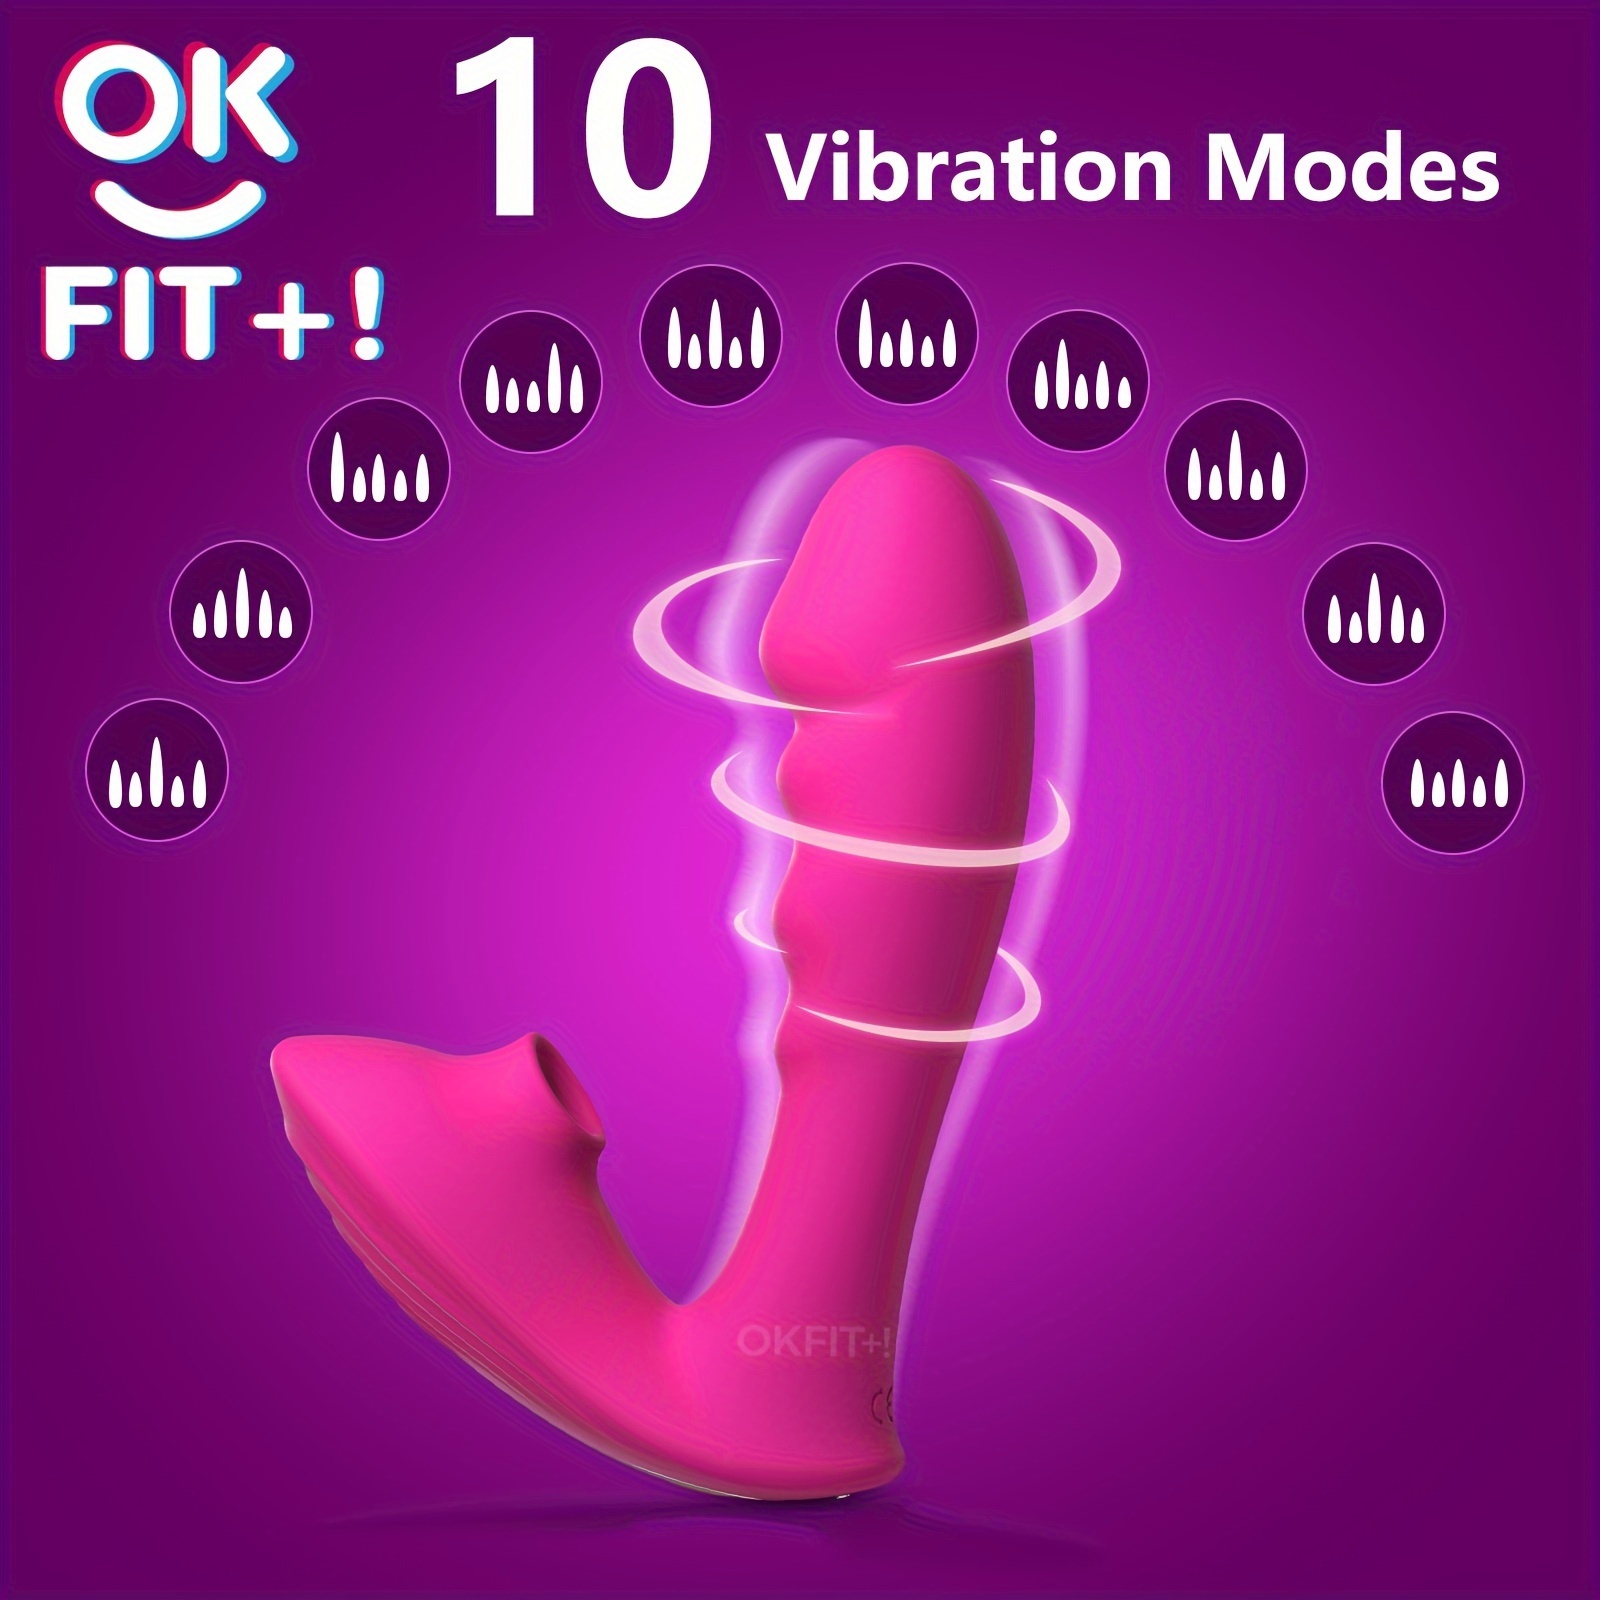 Wearable G Spot Vibrator, Lifelike Sucking Vibrator, Clitoral Anal Nipple Stimulator, Clit Tongue Licking Toy For Women, Adult Sex Toys For Pleasure, Dildo Vibrating Sex Toys For Women And Couples